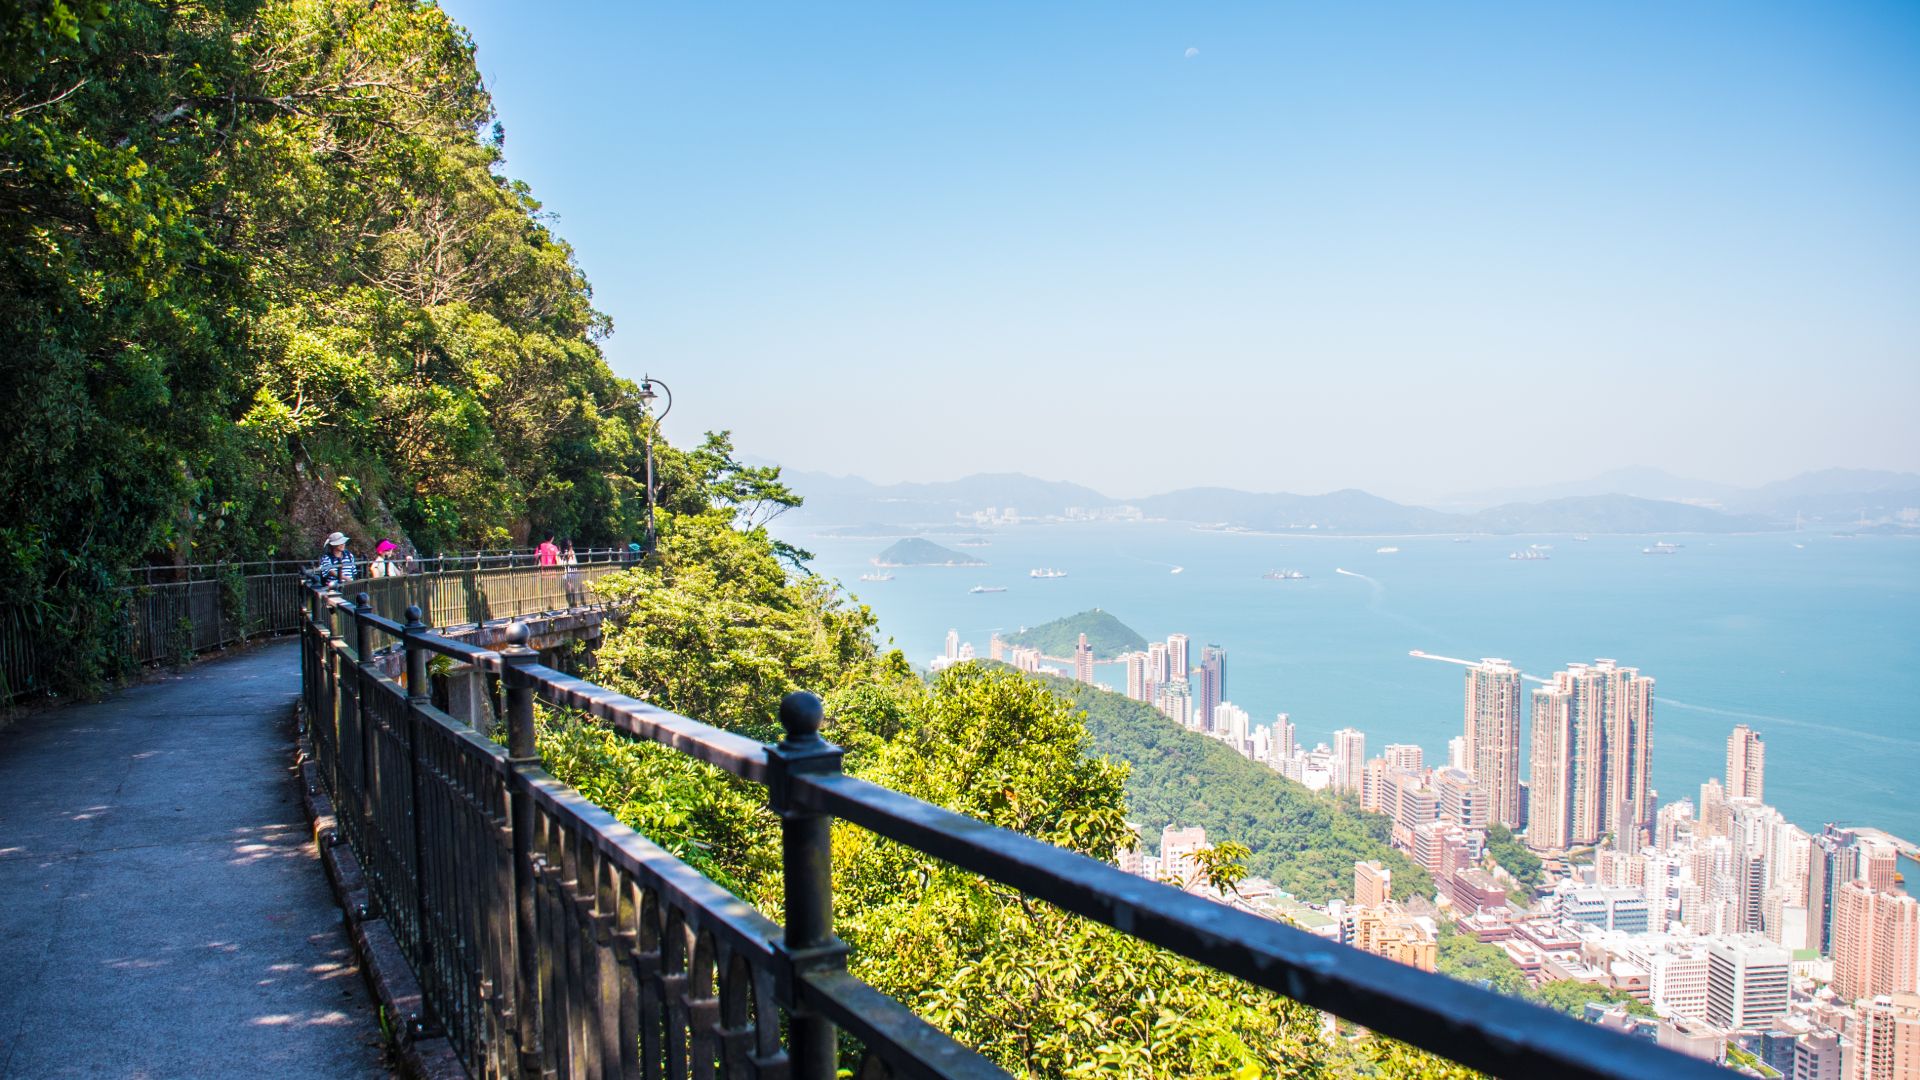 Visitors can walk along the Peak Round Walk for a scenic view from atop.